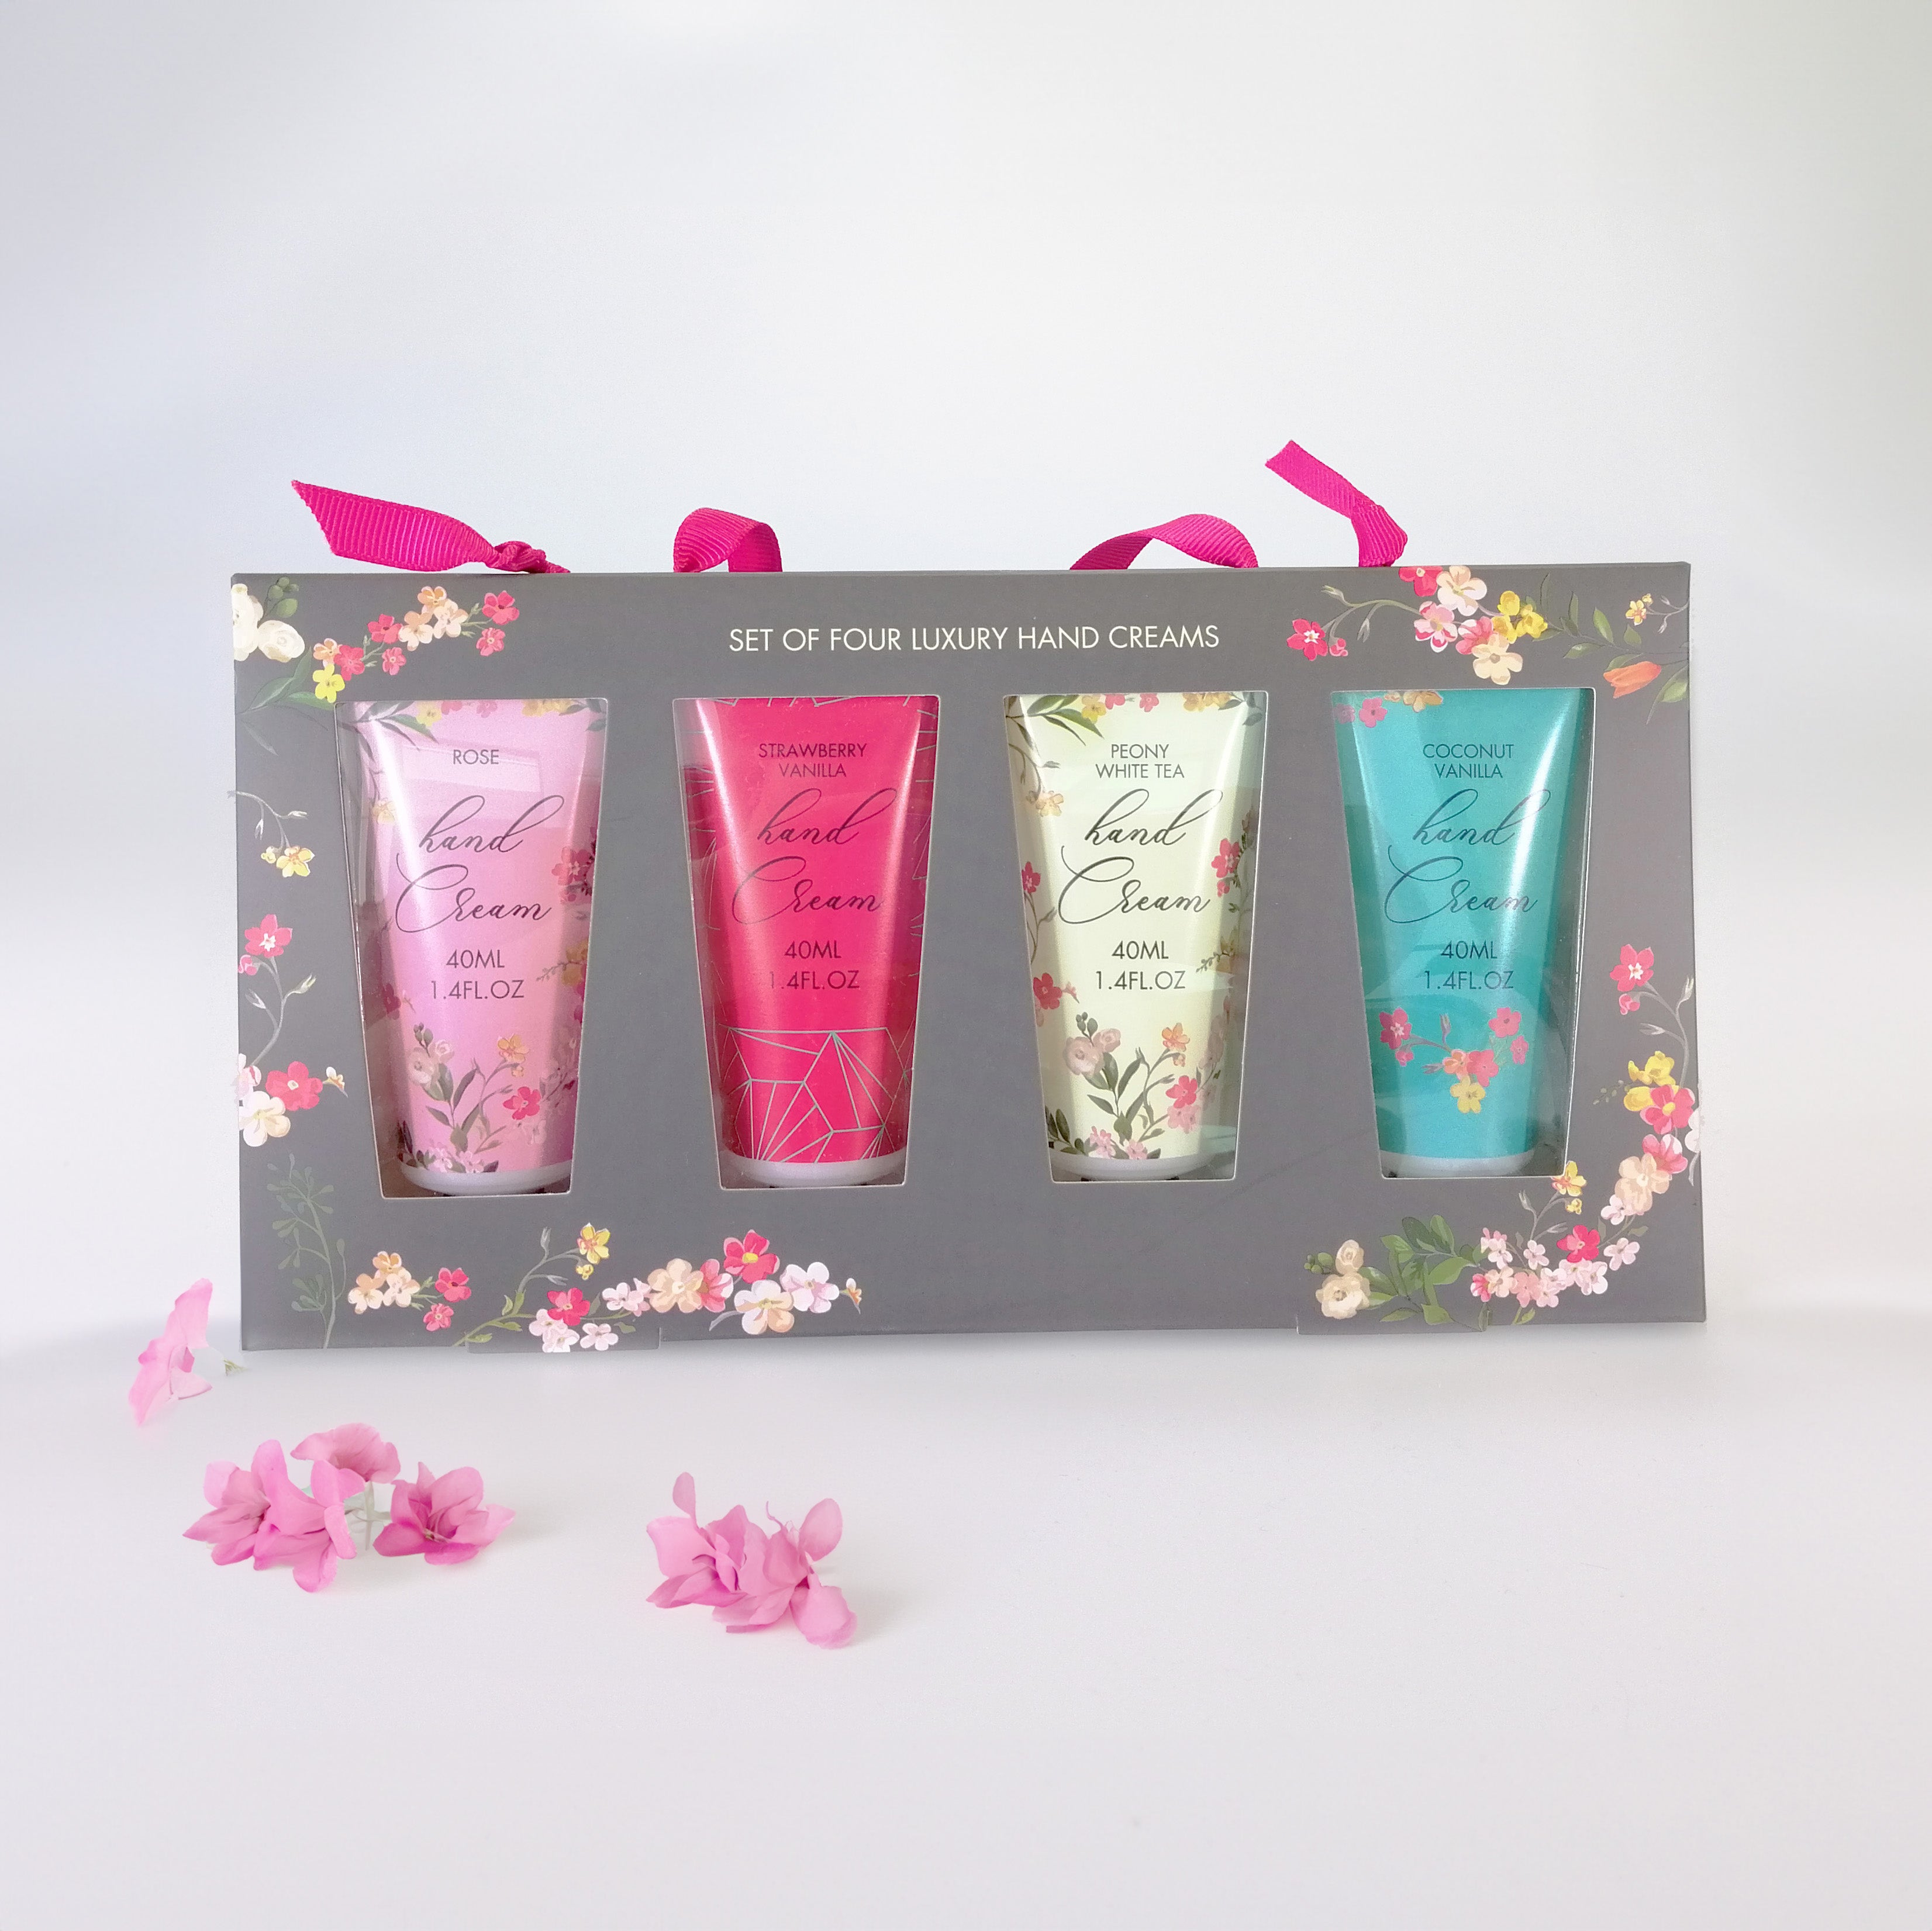 Luxury Scented Hand Creams - Gift Set of 4